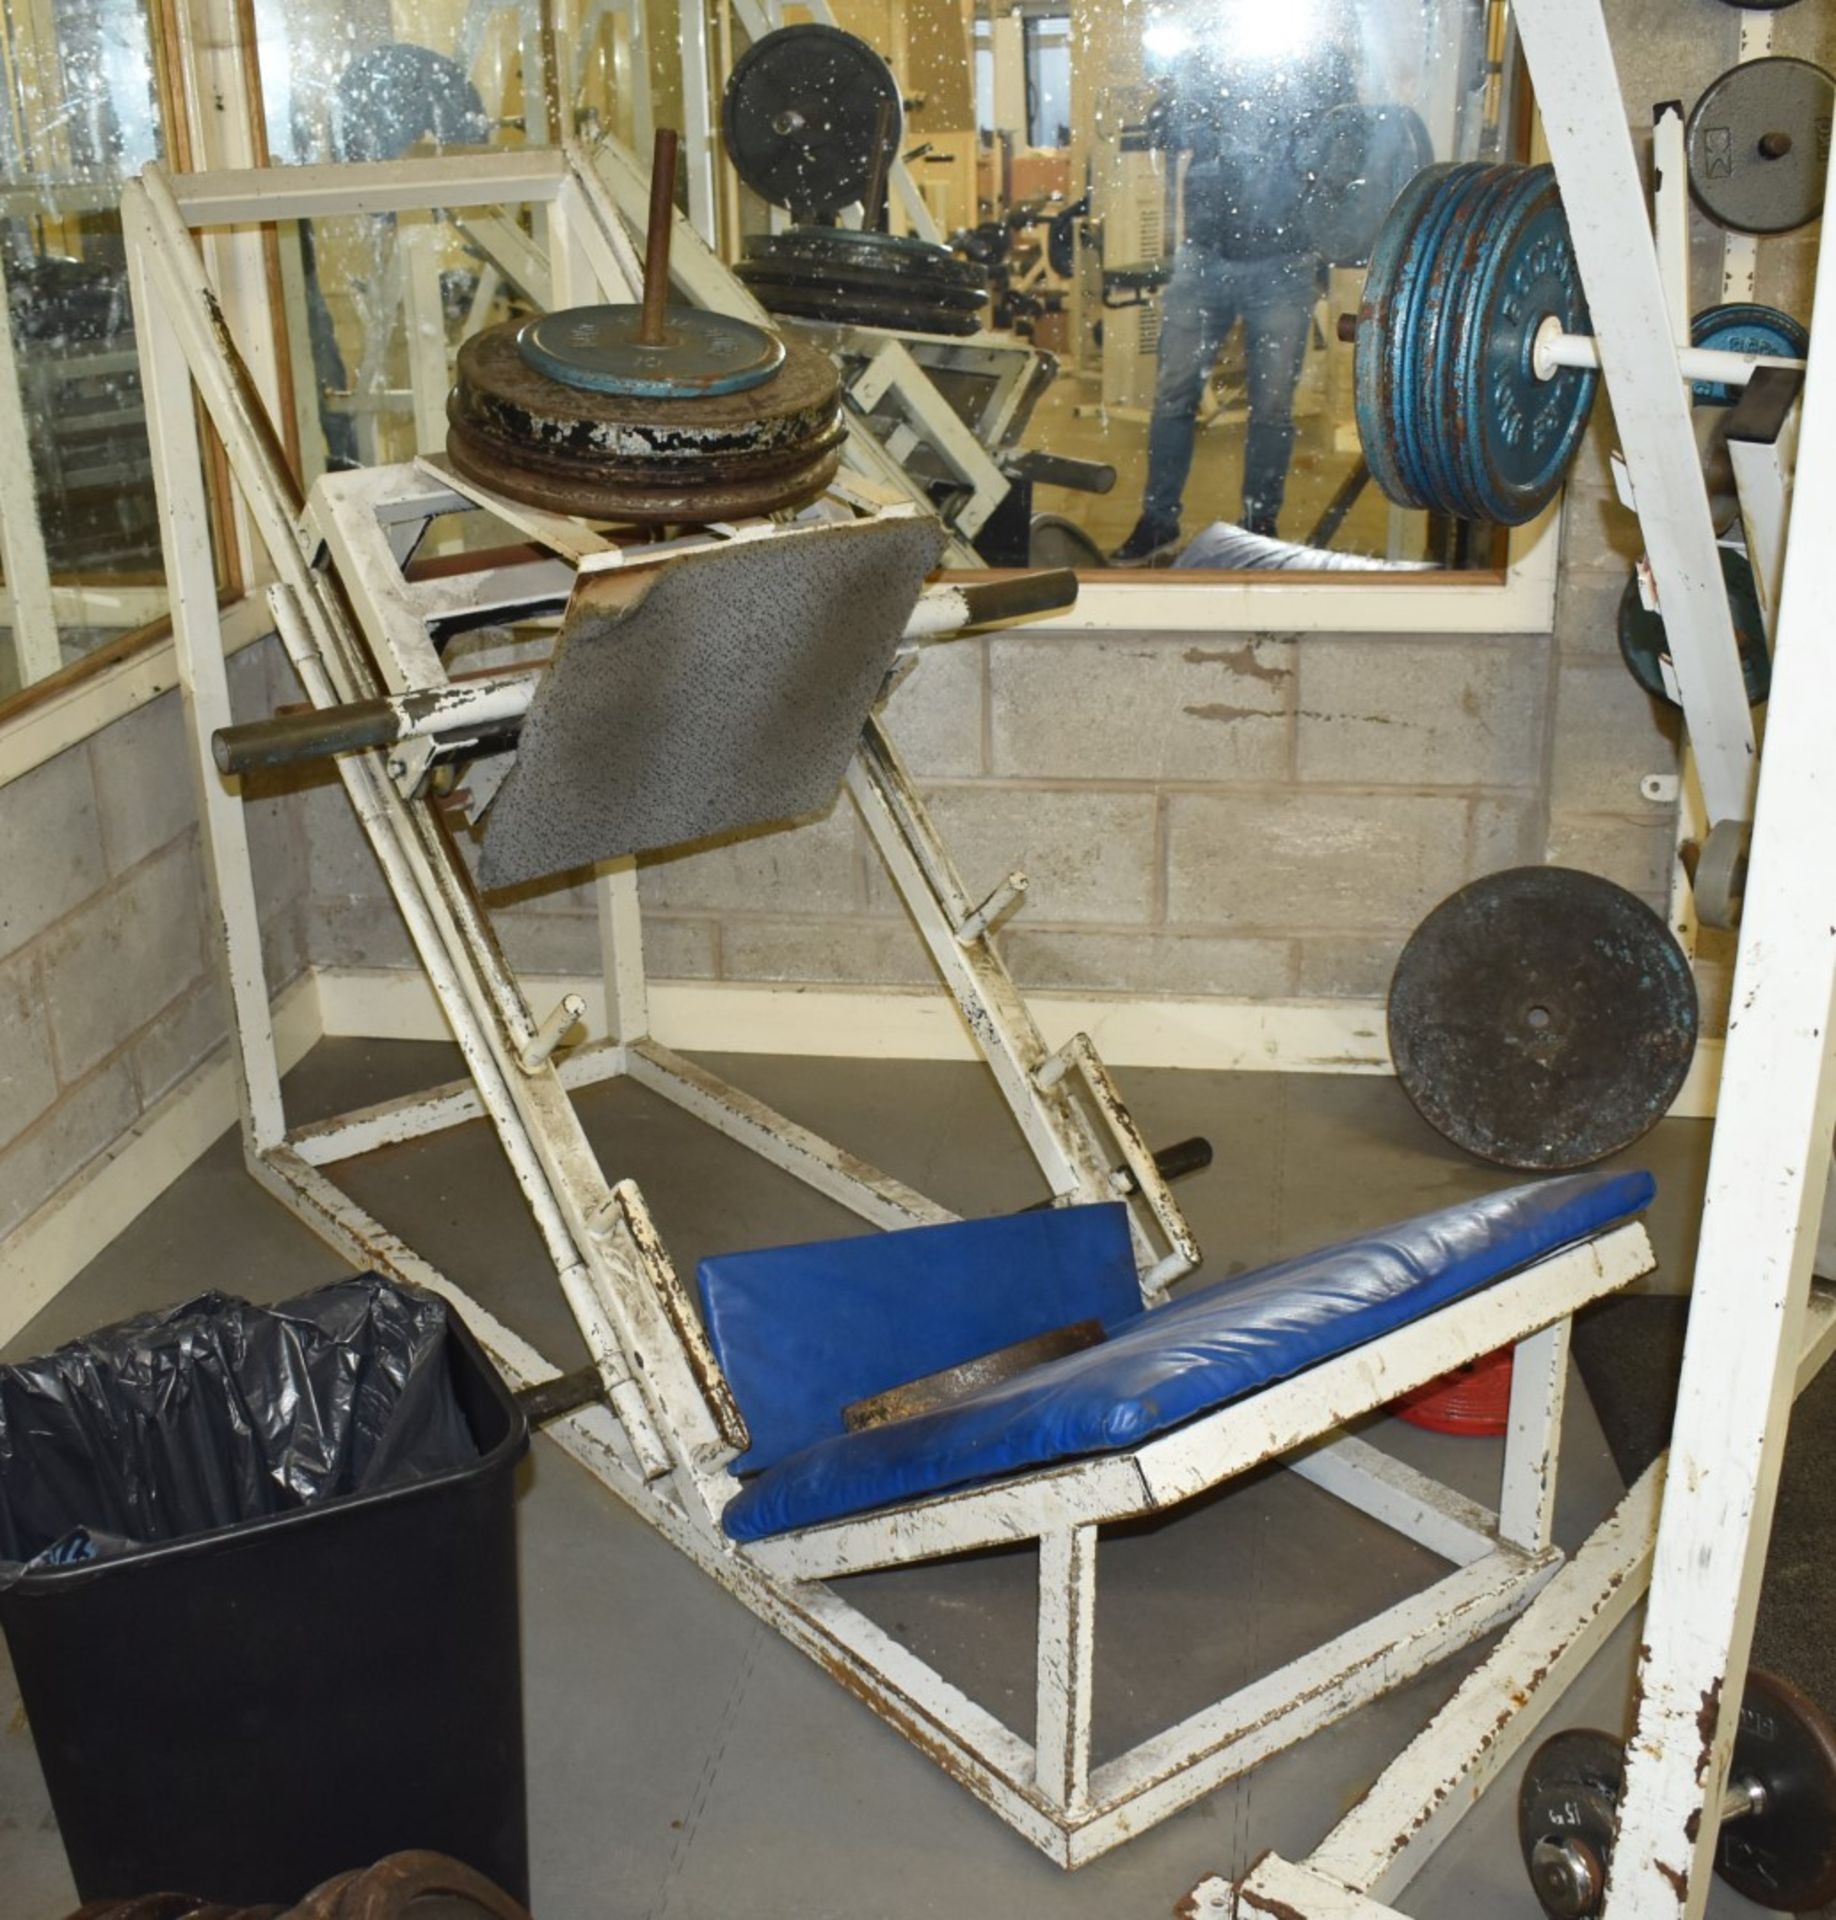 Contents of Bodybuilding and Strongman Gym - Includes Approx 30 Pieces of Gym Equipment, Floor Mats, - Image 44 of 95